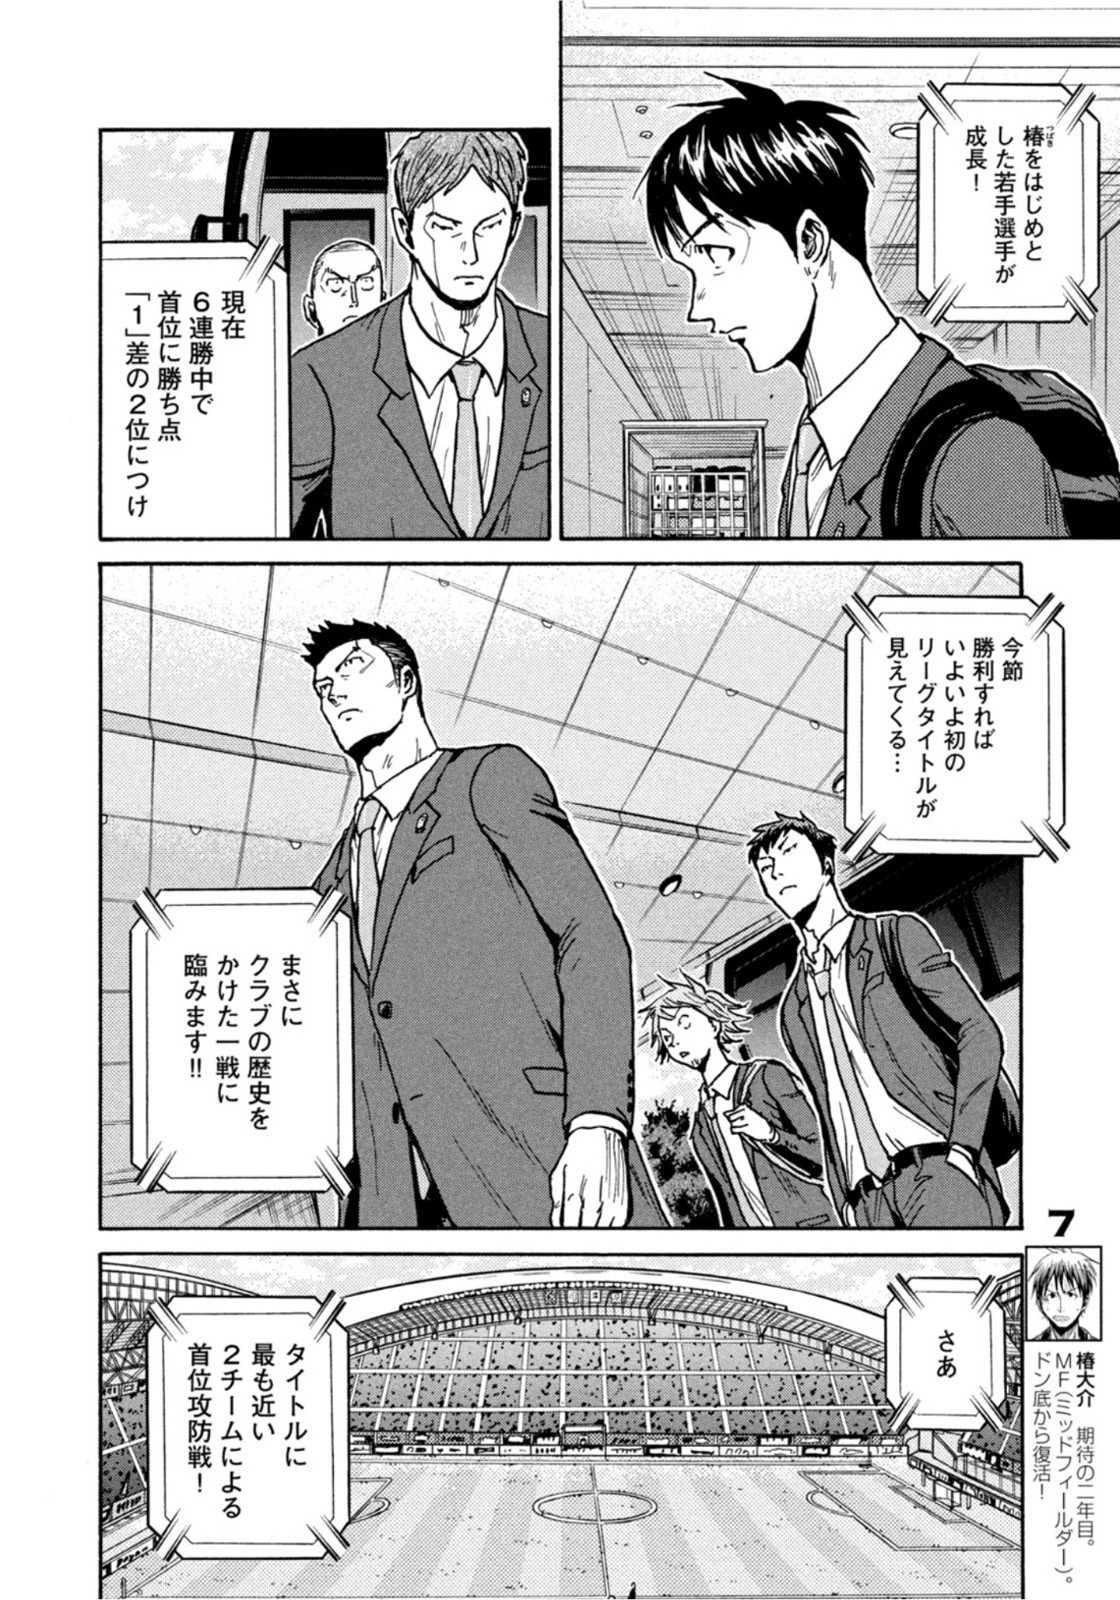 Giant Killing - Chapter 605 - Page 6